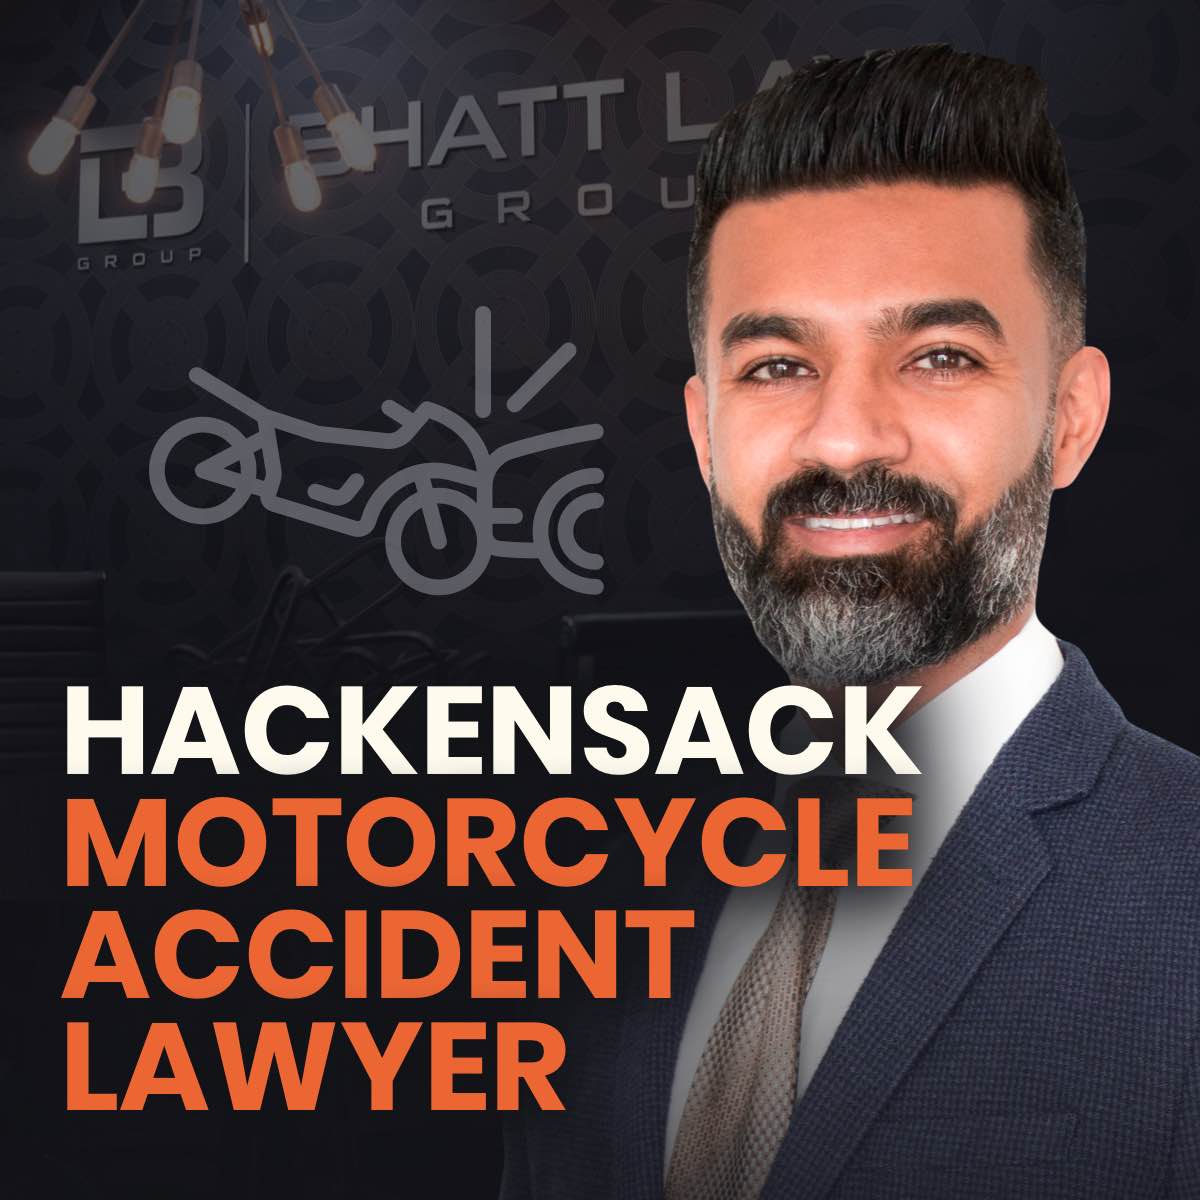 Hackensack Motorcycle Accident Lawyer